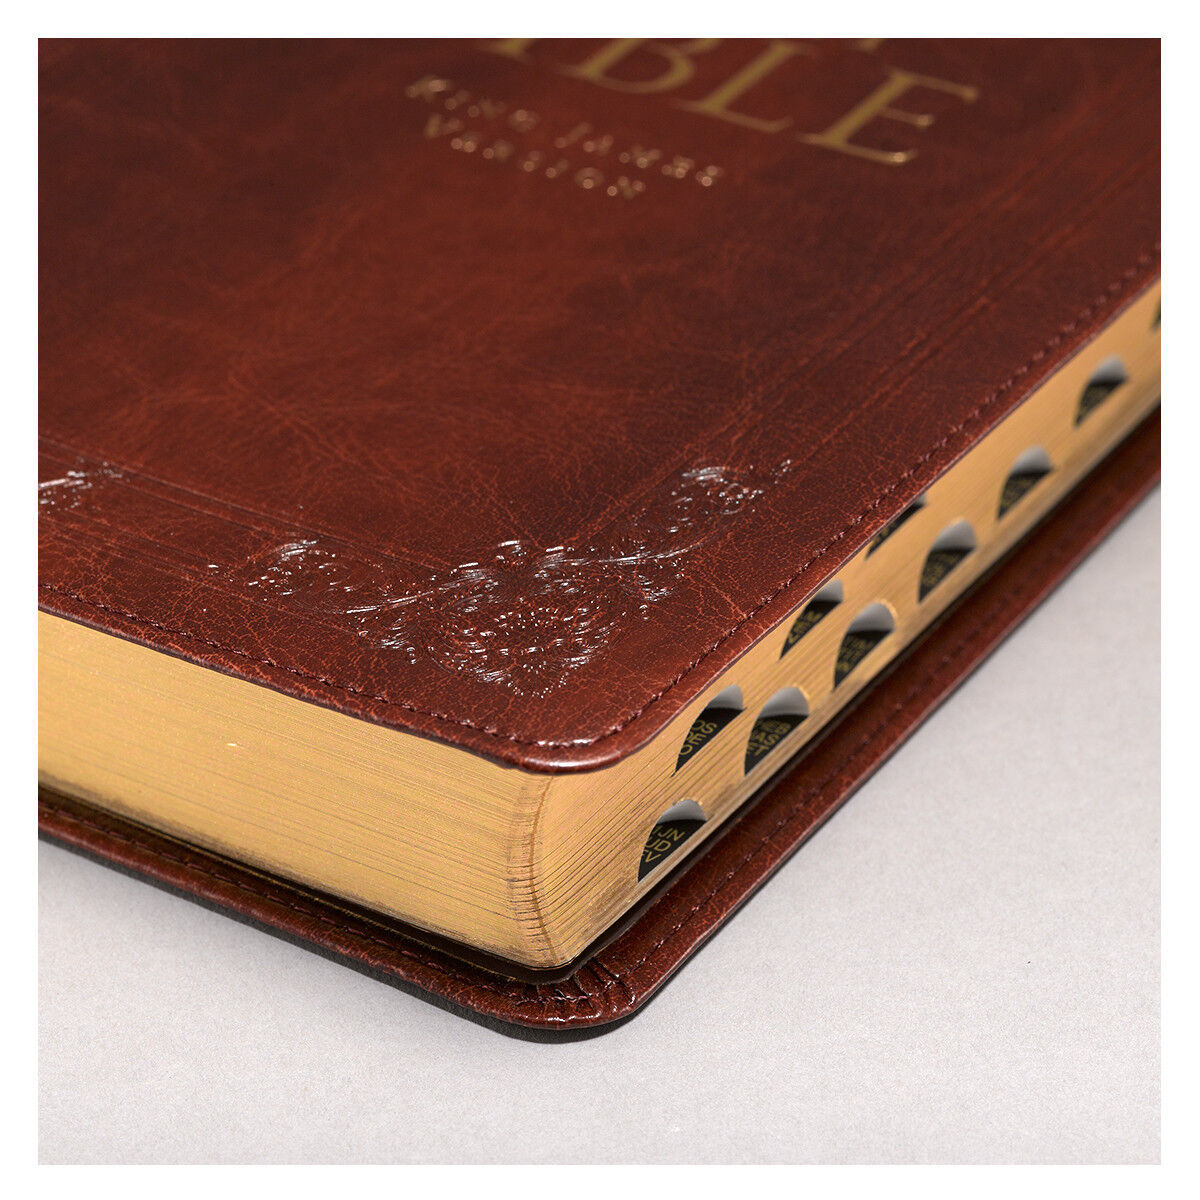  Holy Bible King James Version Thumb Indexed Burgundy Faux Leather Gift Bible Без бренда - фотография #3